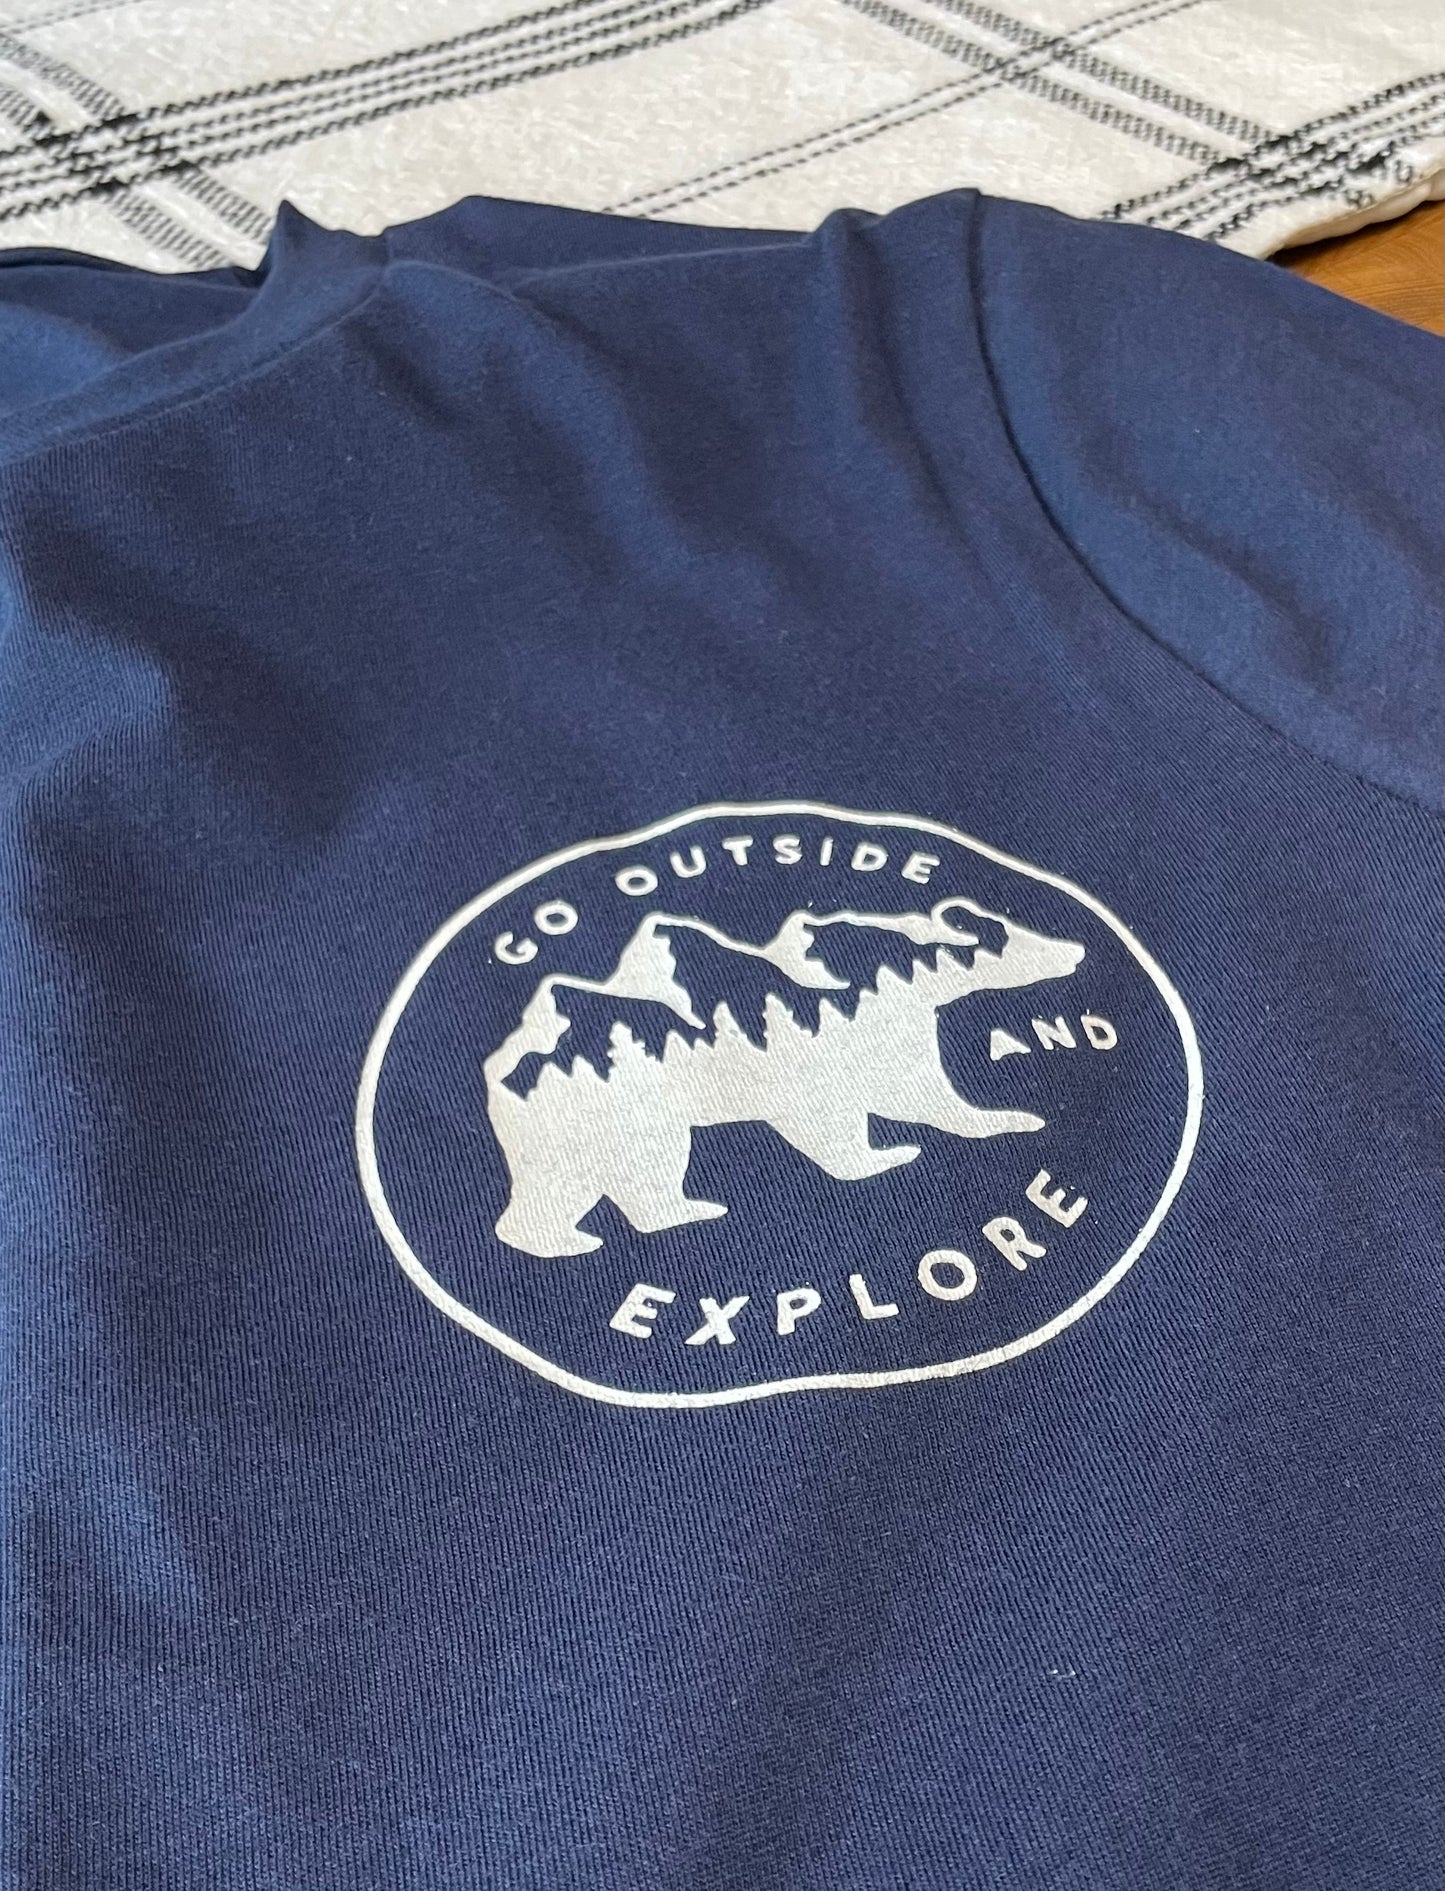 Go Outside & Explore - T-Shirt - front patch up close stylized view